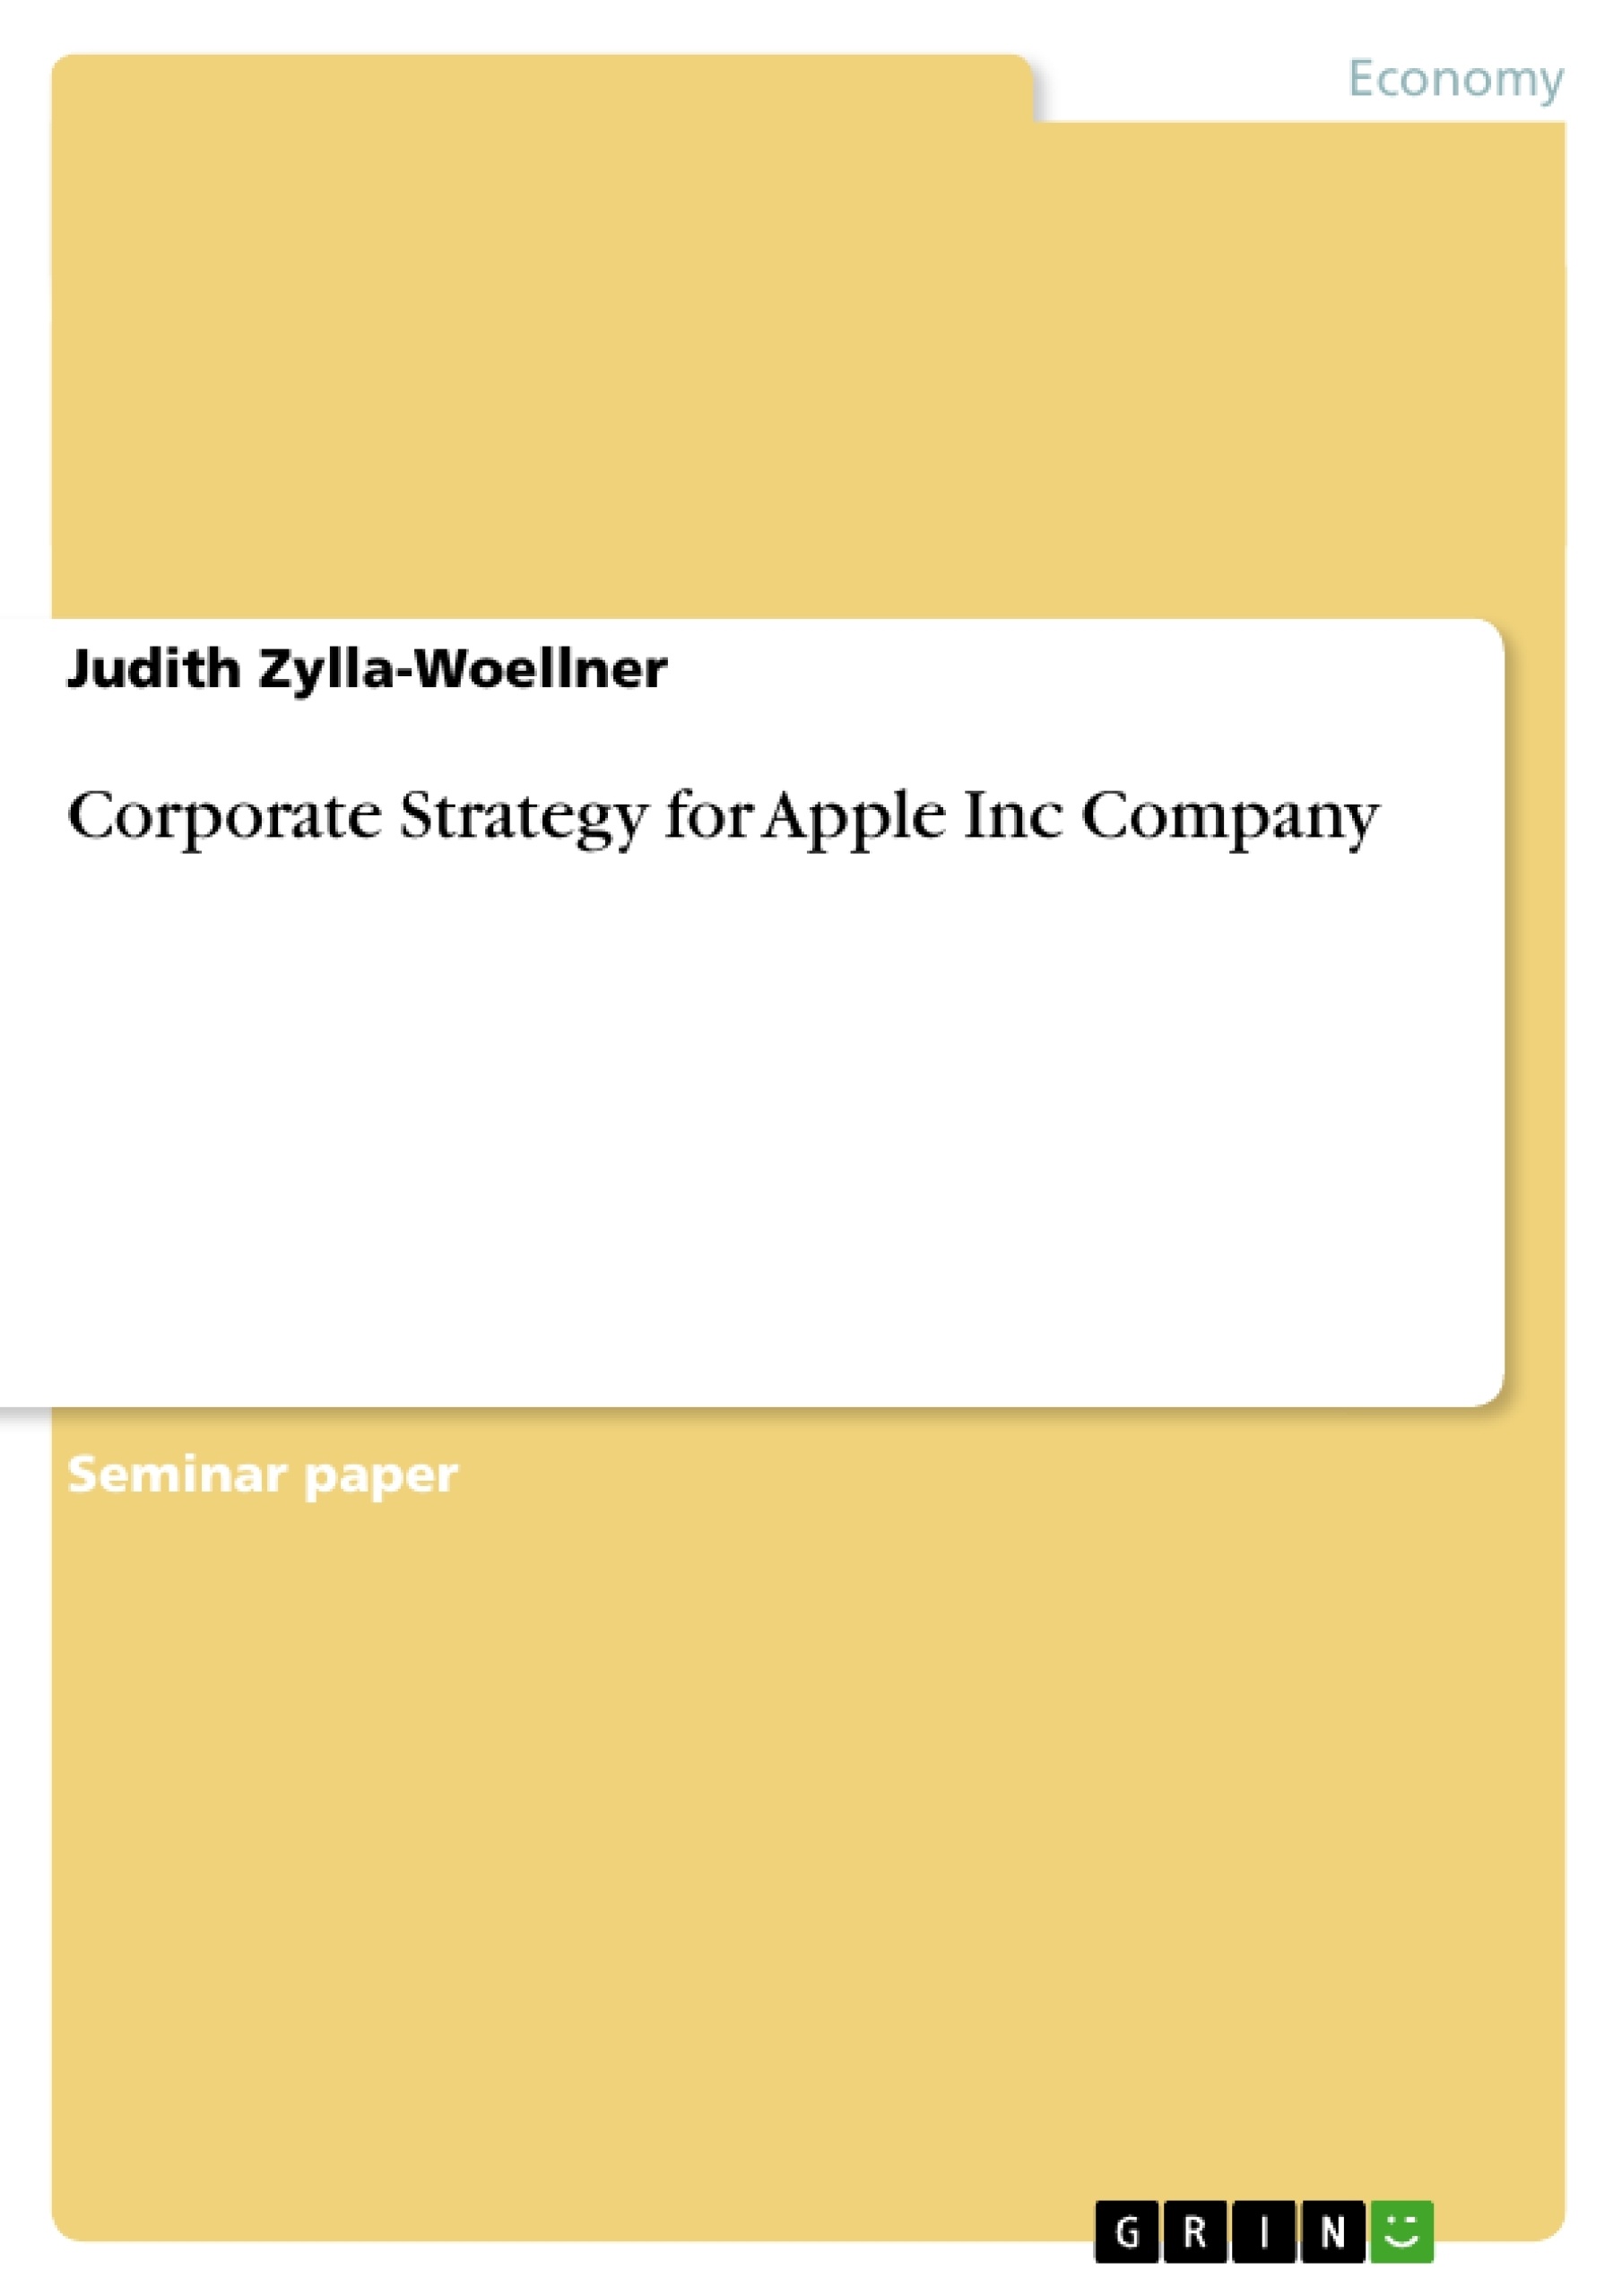 Title: Corporate Strategy for Apple Inc Company